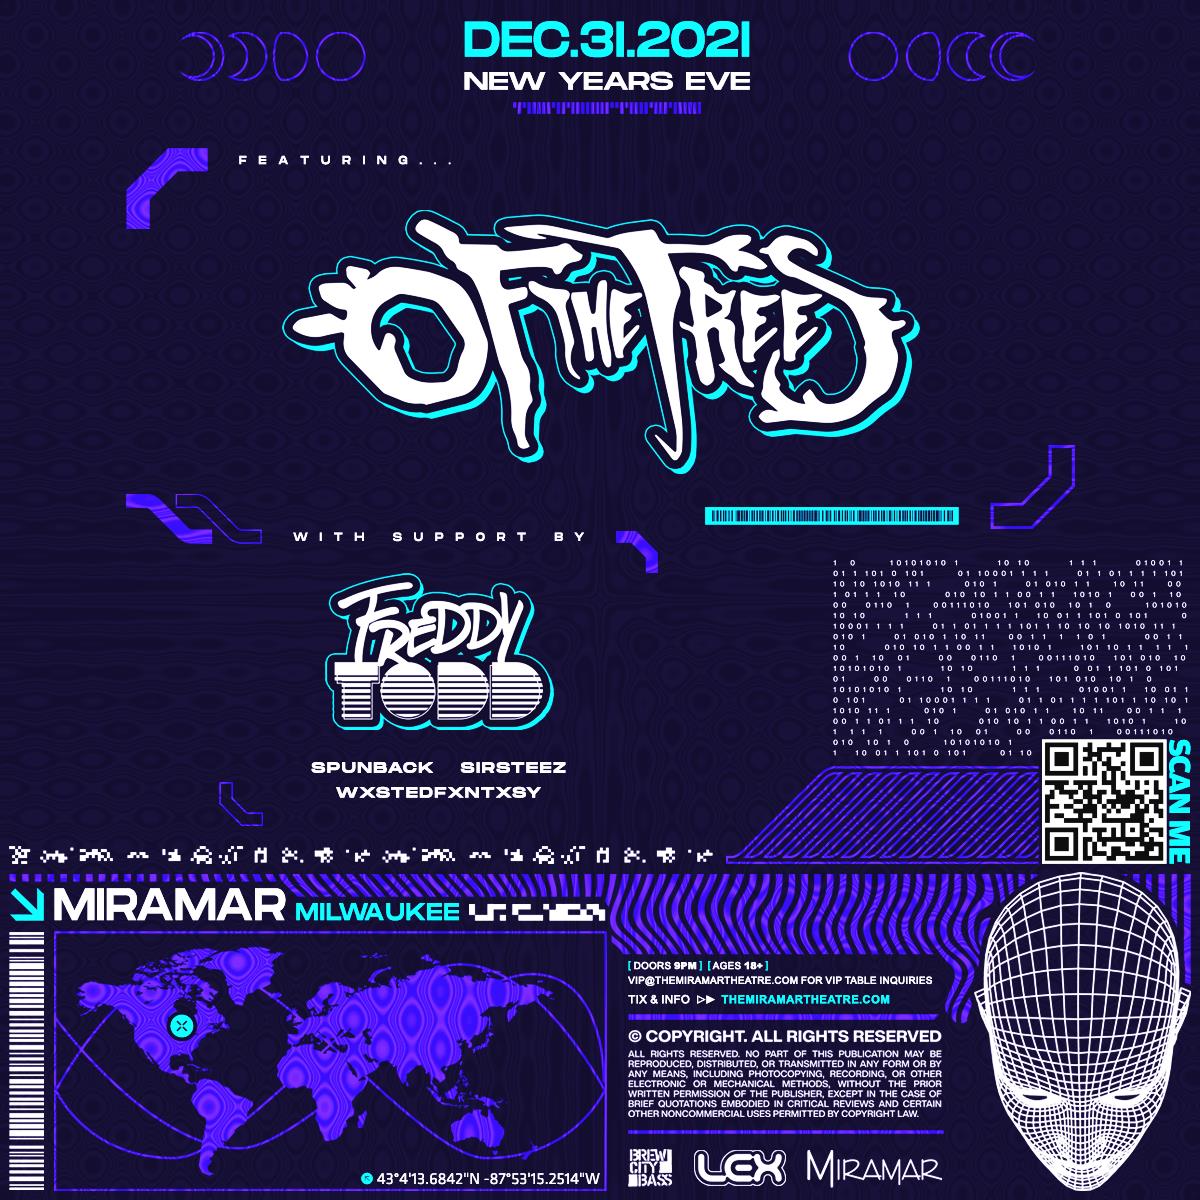 Buy Tickets To New Years Eve Ft Of The Trees Freddy Todd In Milwaukee On Dec 31 2021 4706